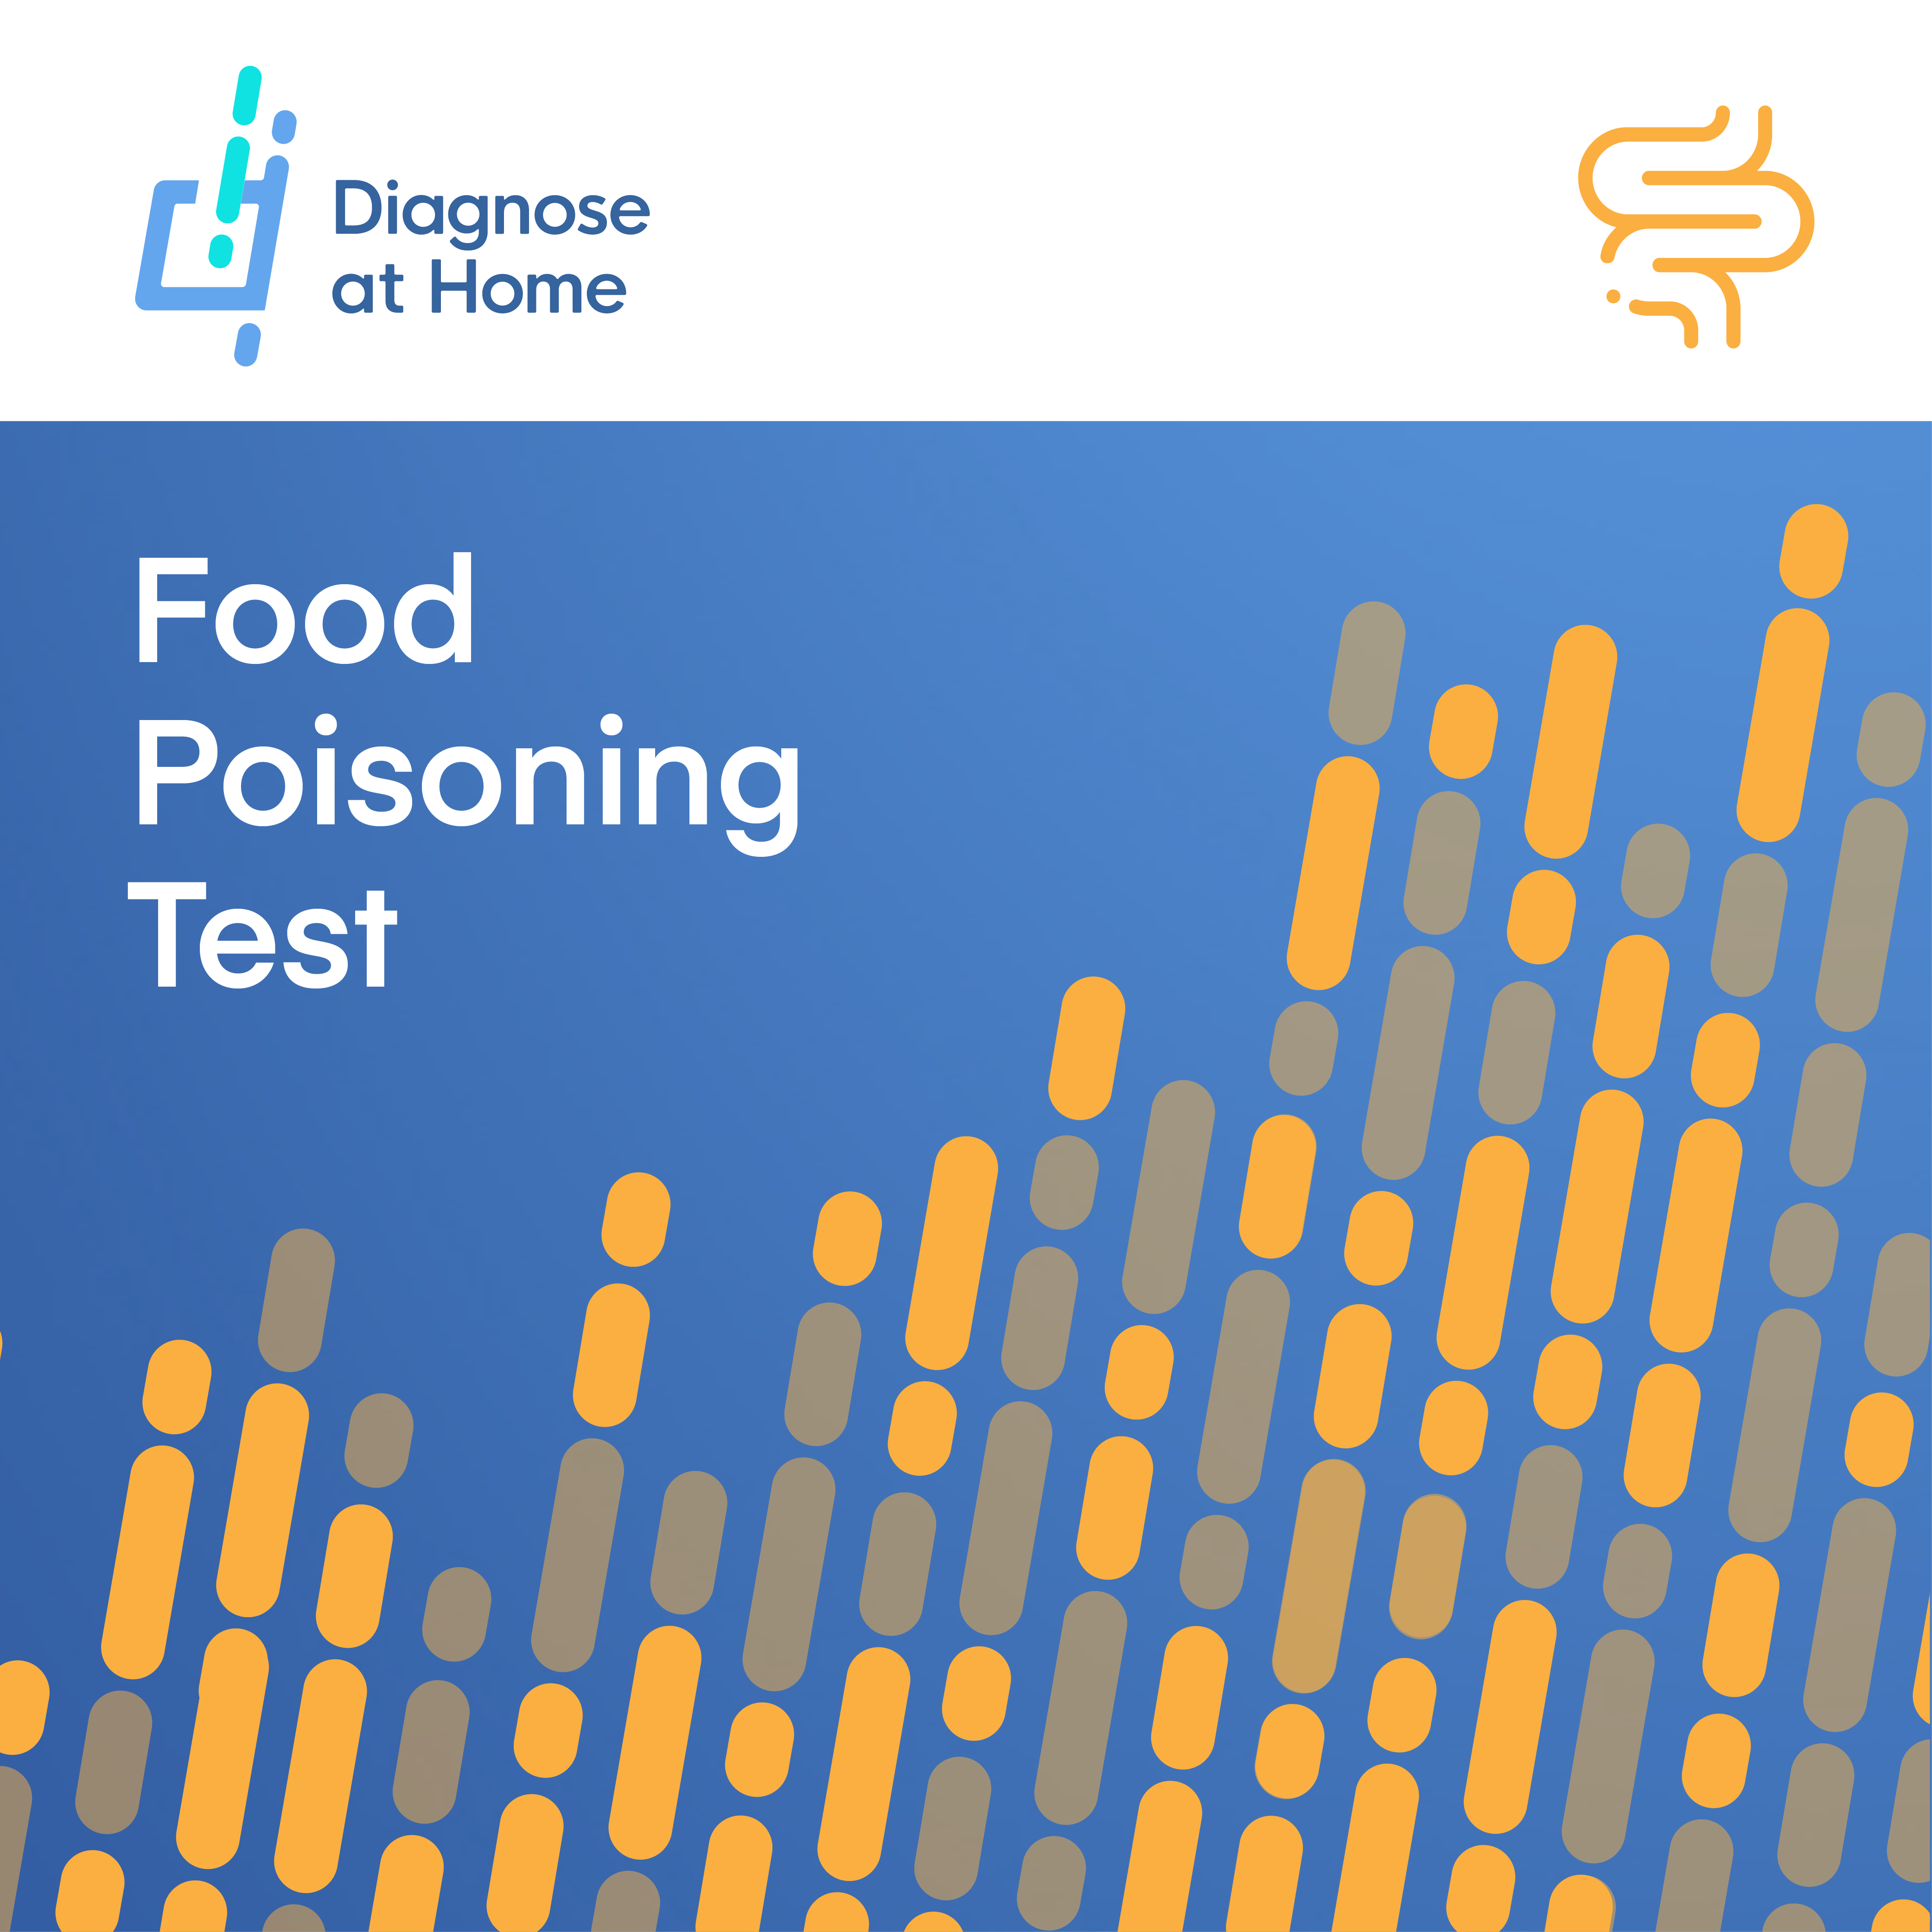 Food Poisoning Test Kit cover